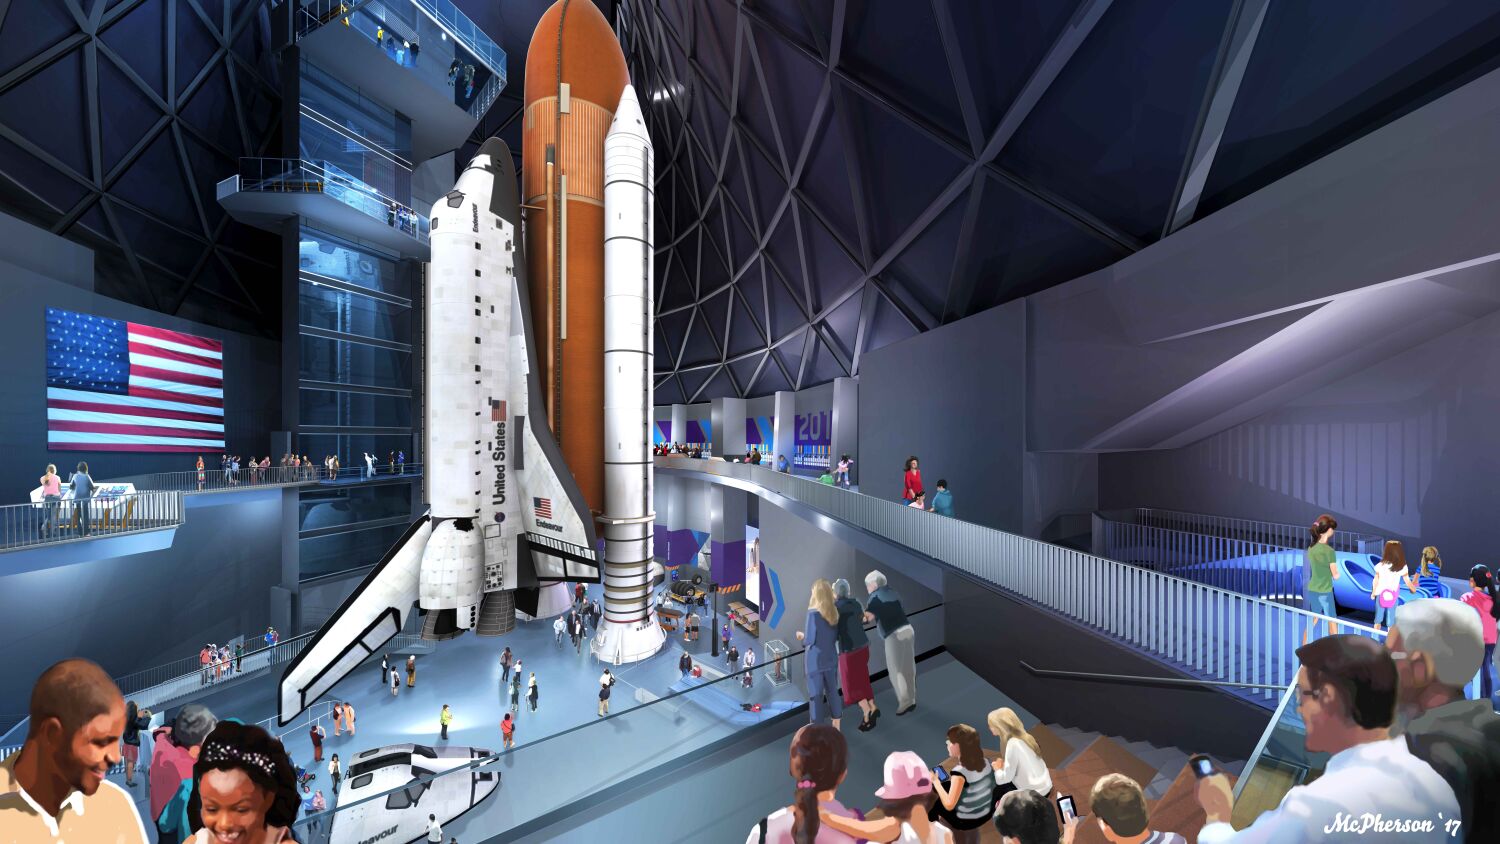 Space shuttle Endeavour preps for move to vertical landing in new museum